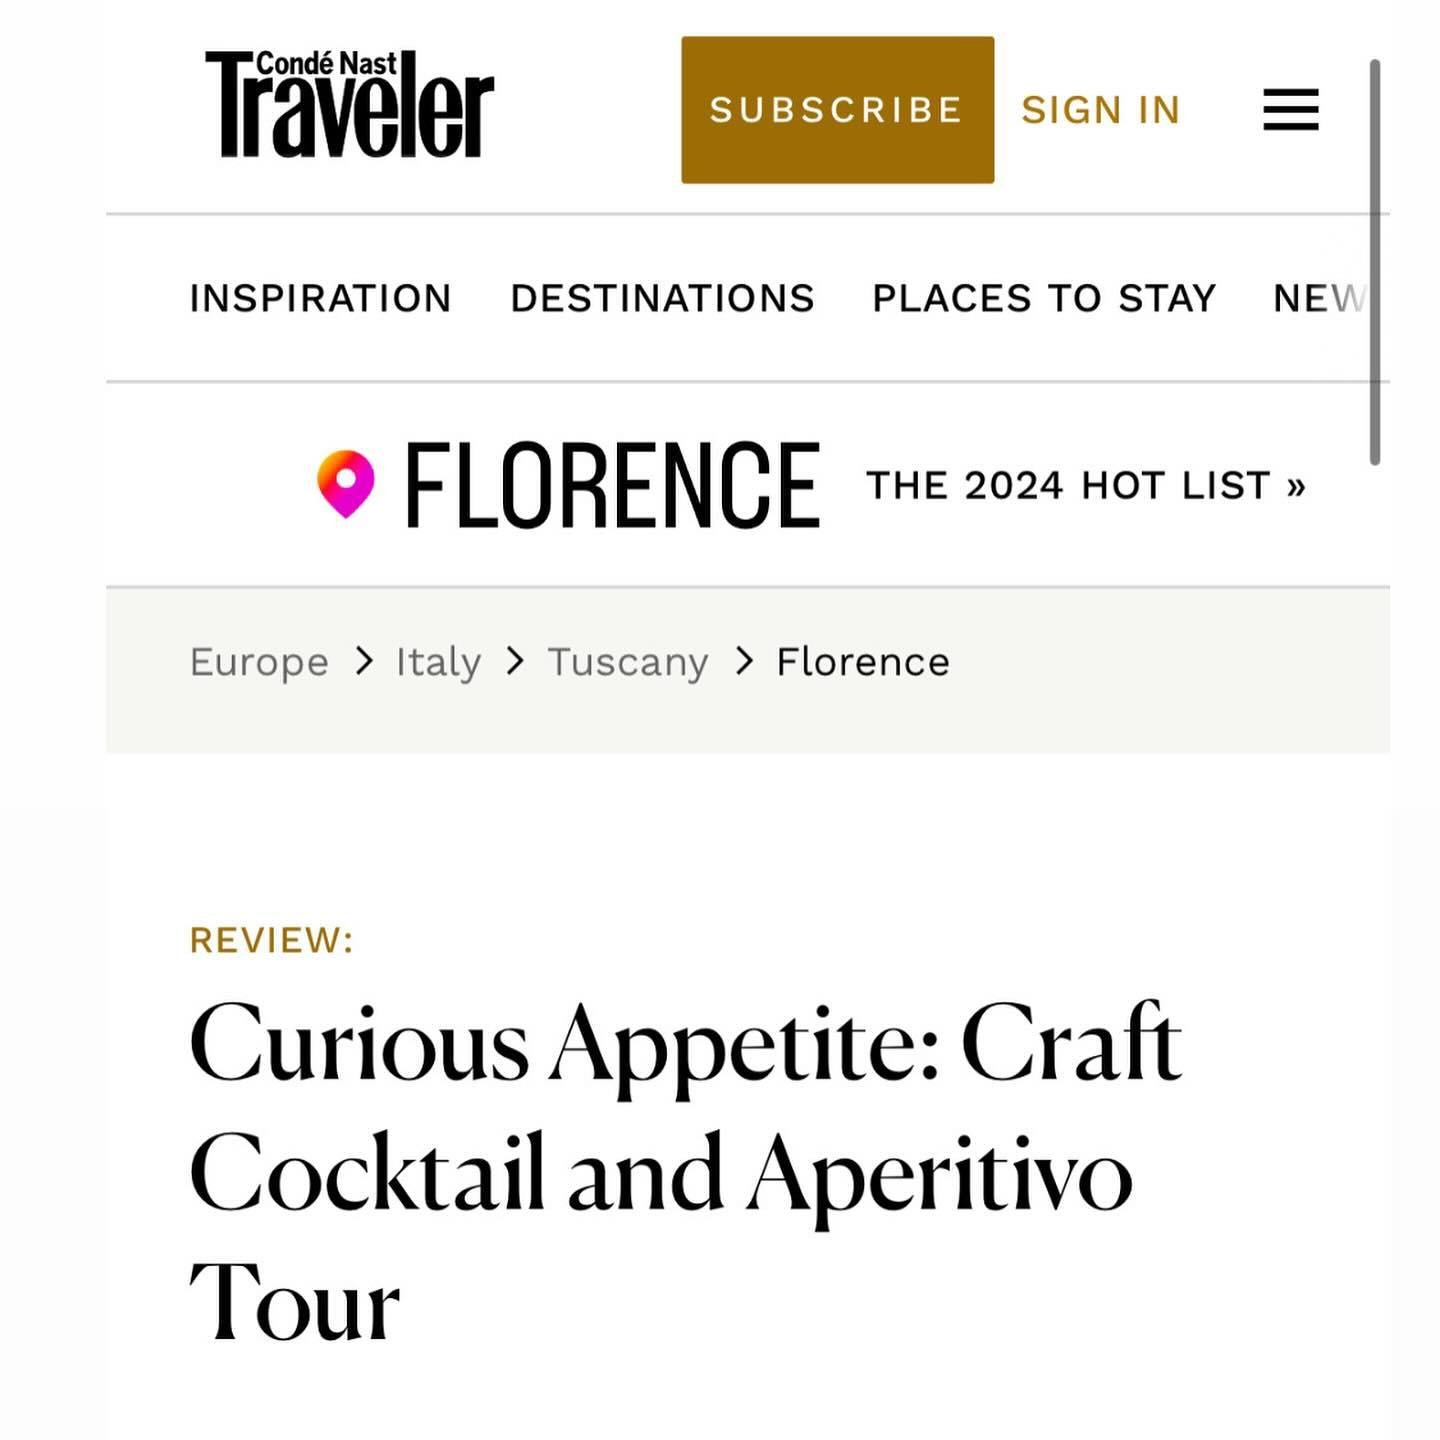 OUR APERITIVO TOUR HAS @CNTRAVELER ENERGY

Curious about the origins of the Negroni and the best stirred ones around Florence? Unique Italian wines with snacks made with thoughtful intention?

This labor of love for the ritual of the Italian aperitiv